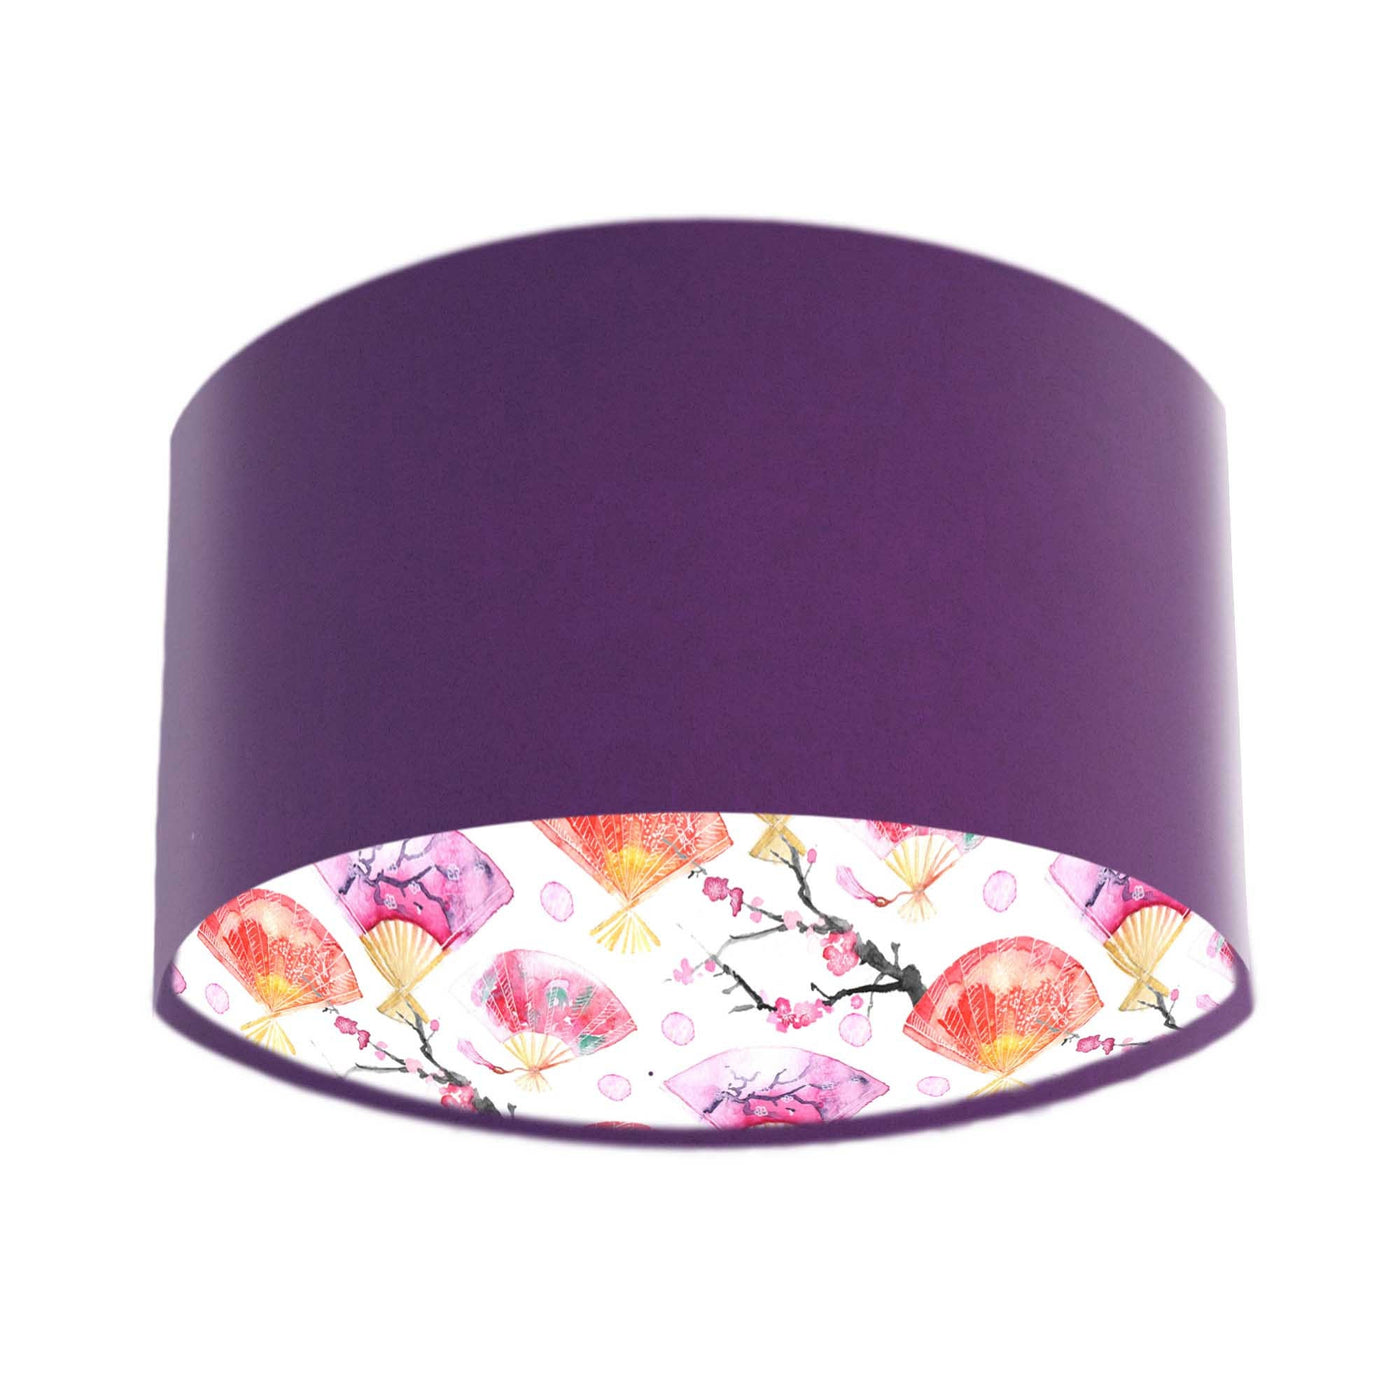 Japanese Fan and Cherry Blossoms Lampshade in Amethyst Velvet